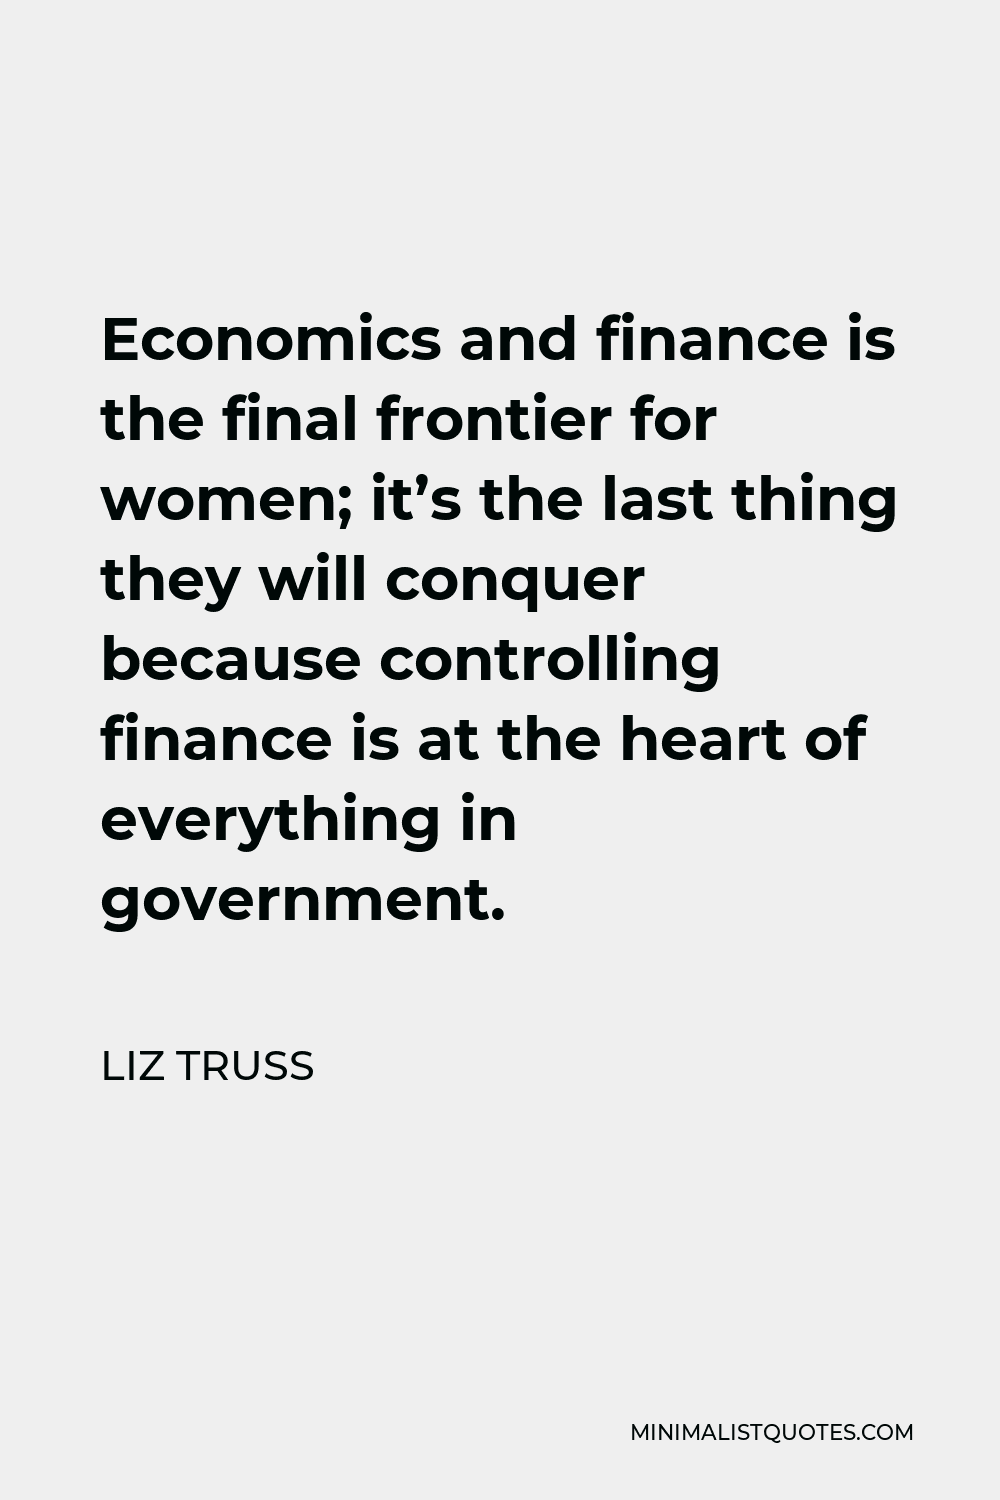 Liz Truss Quote - Economics and finance is the final frontier for women; it’s the last thing they will conquer because controlling finance is at the heart of everything in government.